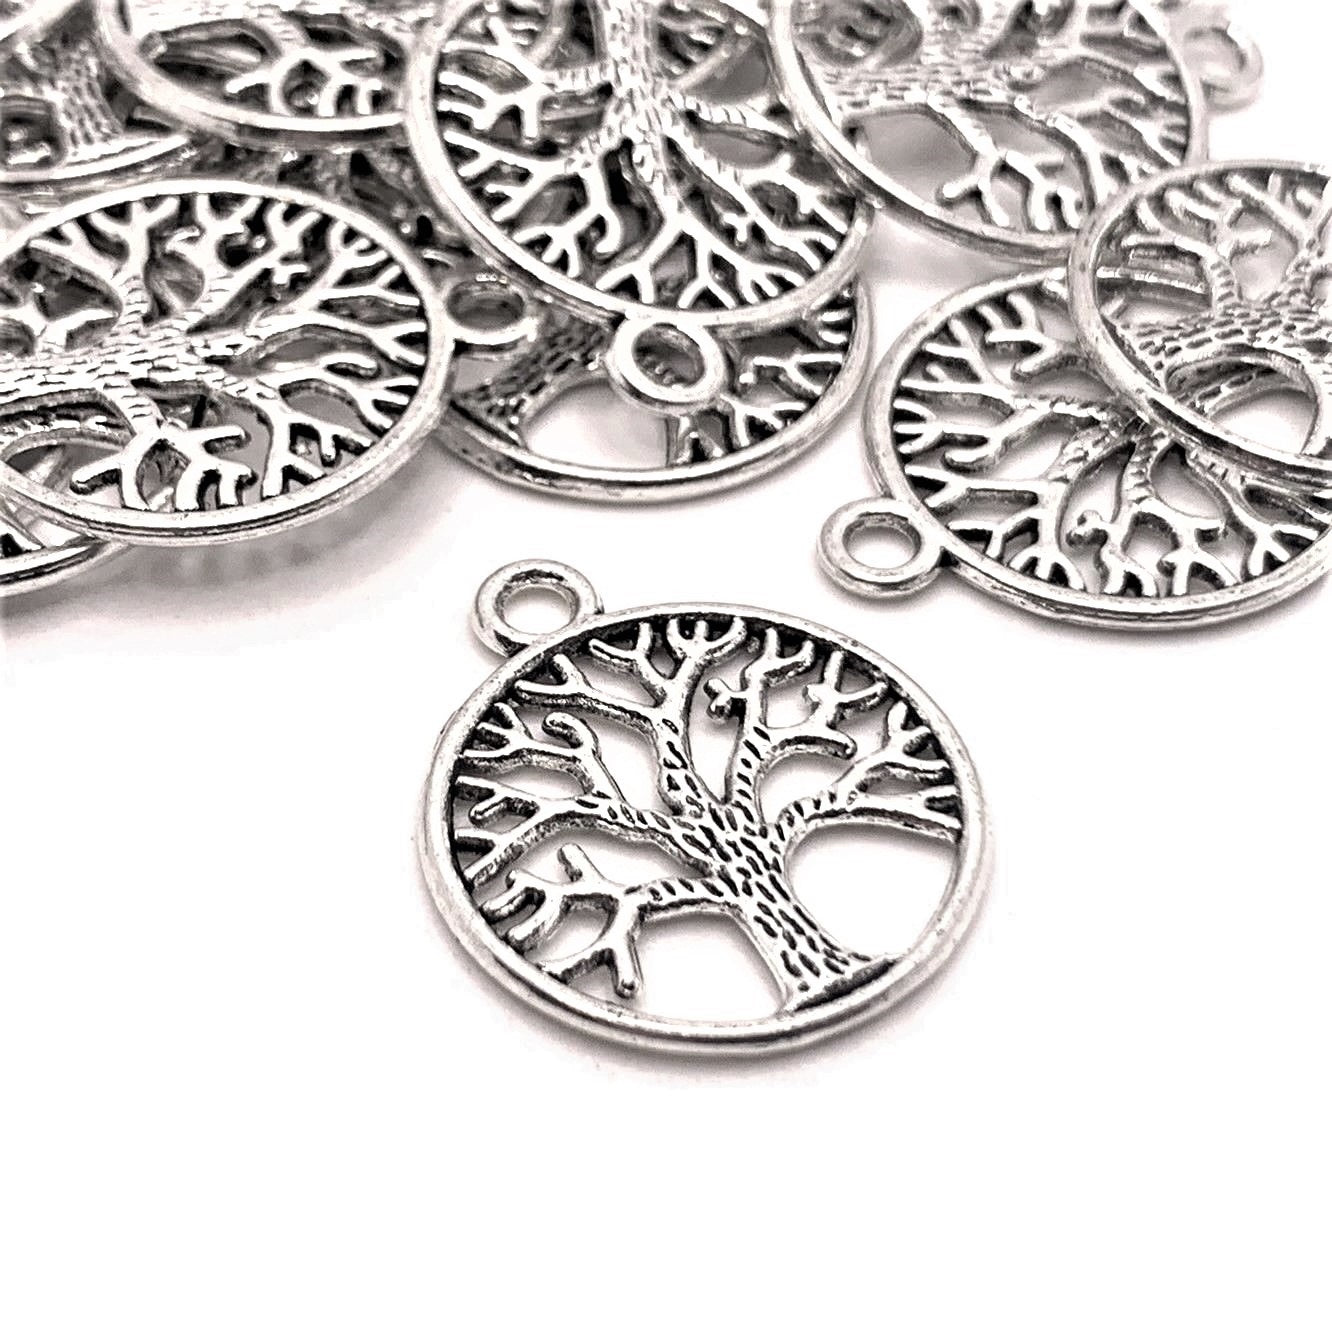 4, 20 or 50 Pieces: Silver Circle Tree of Life Pendant Charms - Double Sided